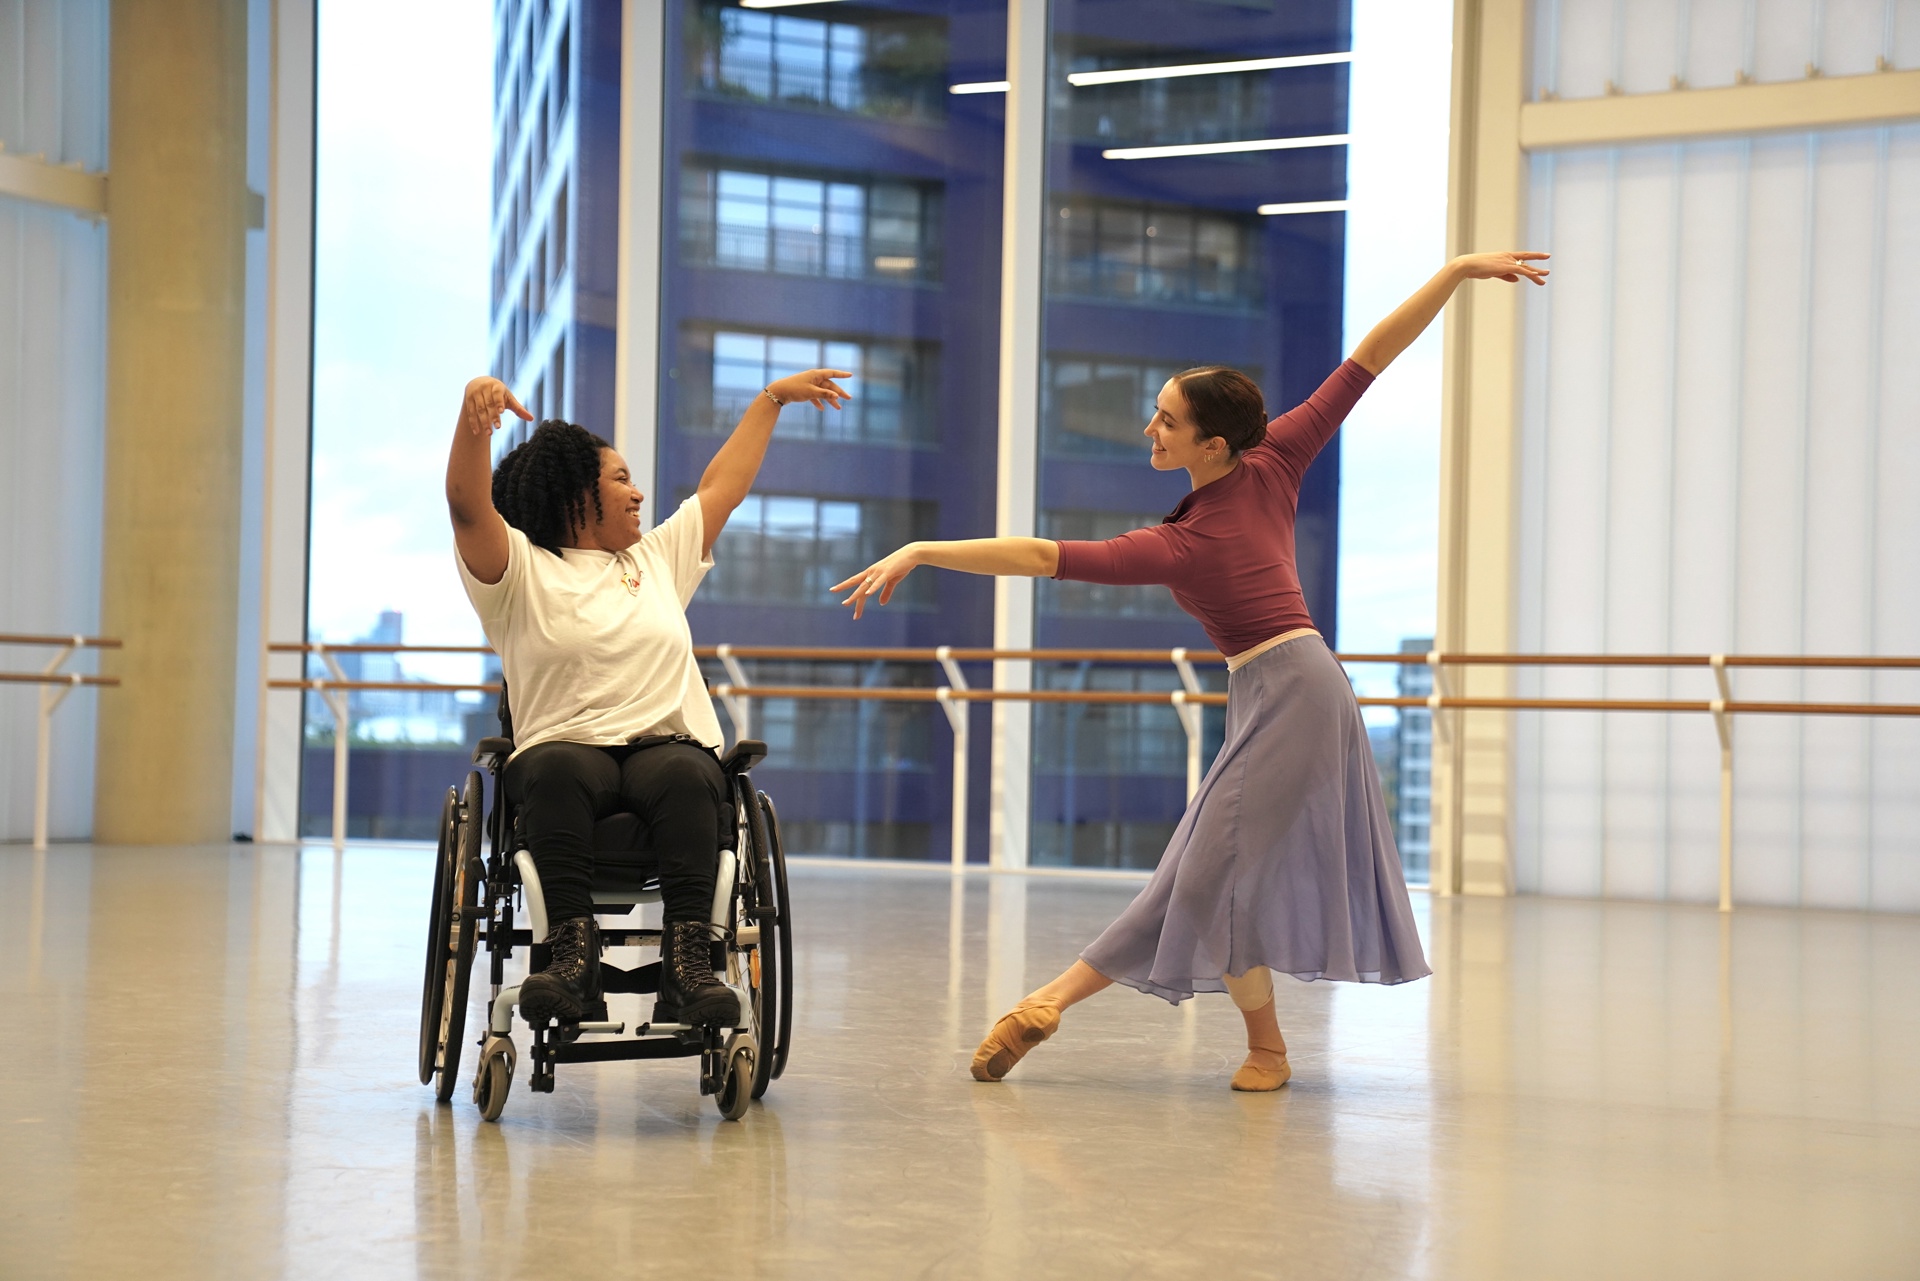 Denecia Allen from icandance (L) and Alice Bellini (R) who will perform together at the Empower in Motion gala from Children Today (c) Isabella Turolla